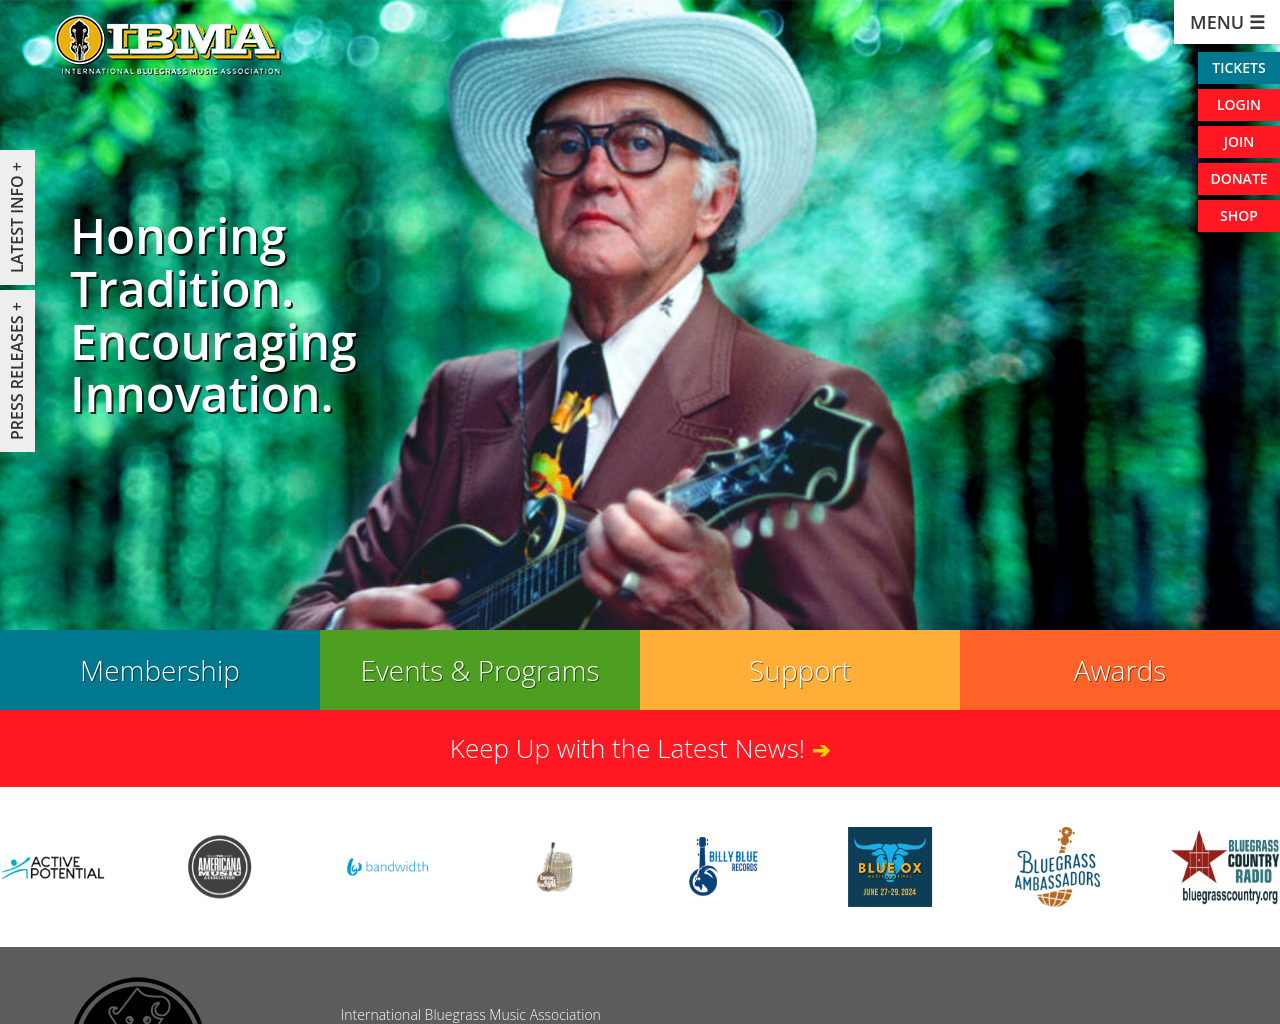 ibma.org